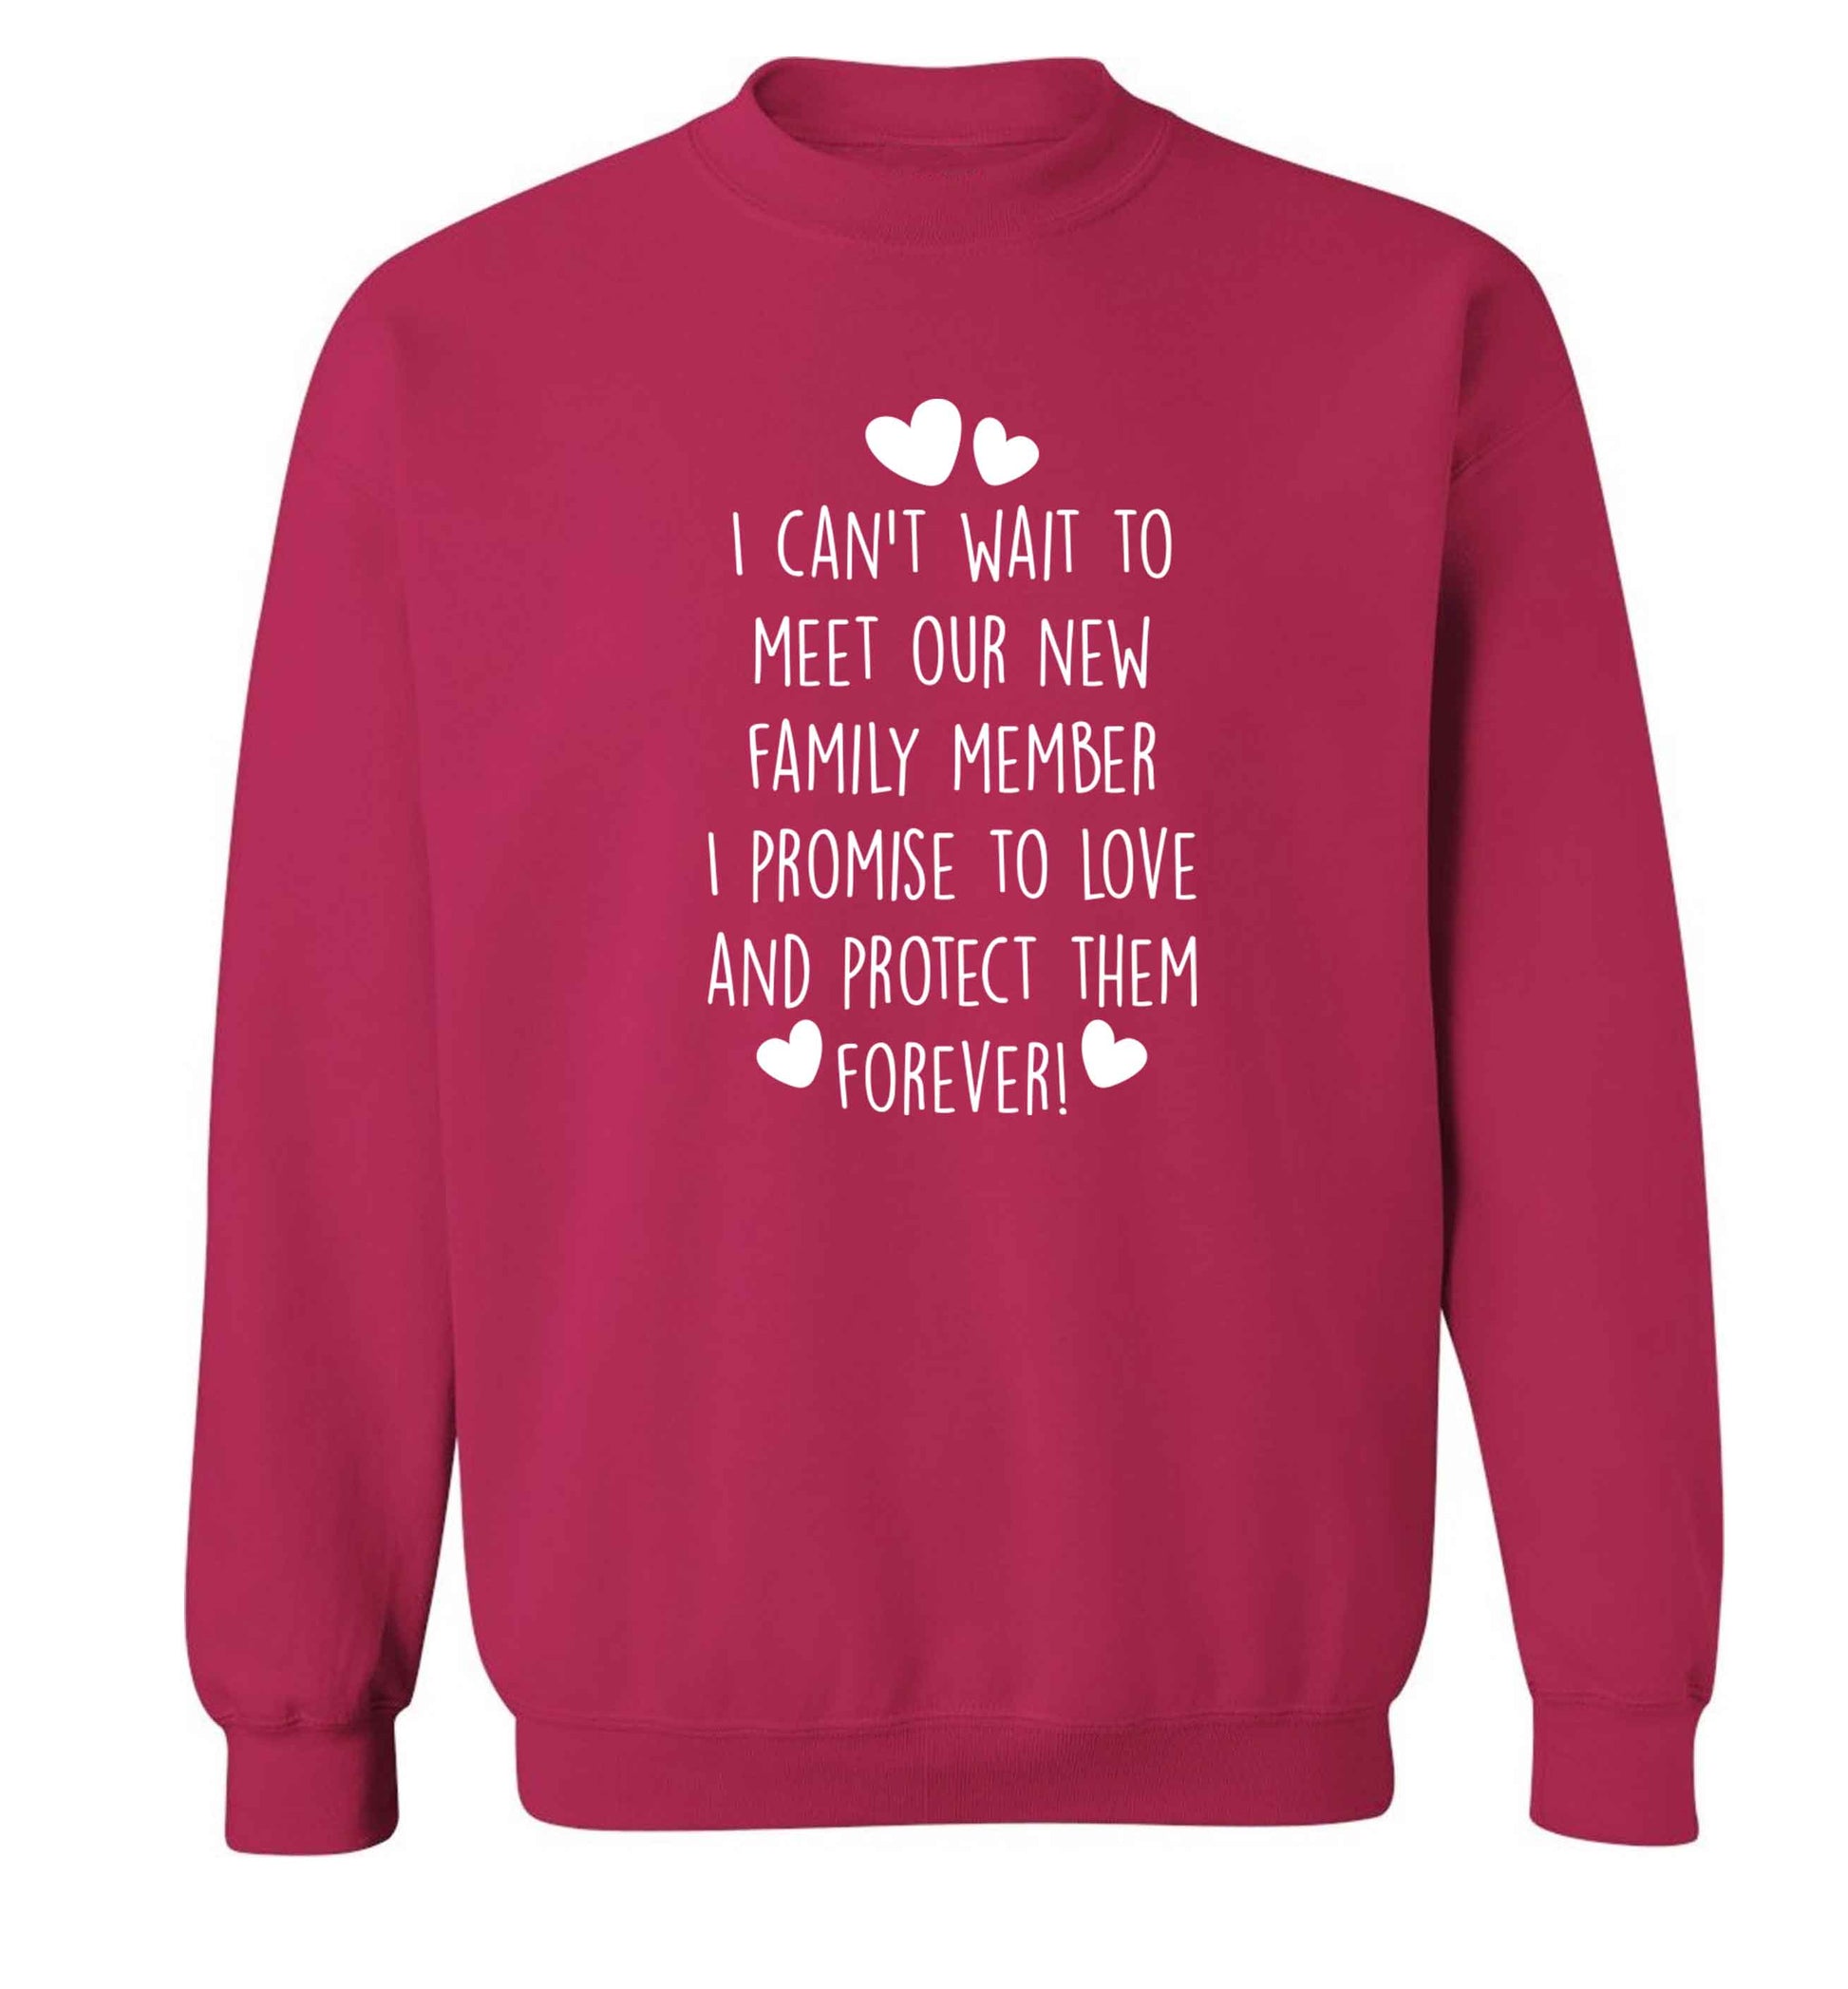 I can't wait to meet our new family member I promise to love and protect them foreverAdult's unisex pink Sweater 2XL